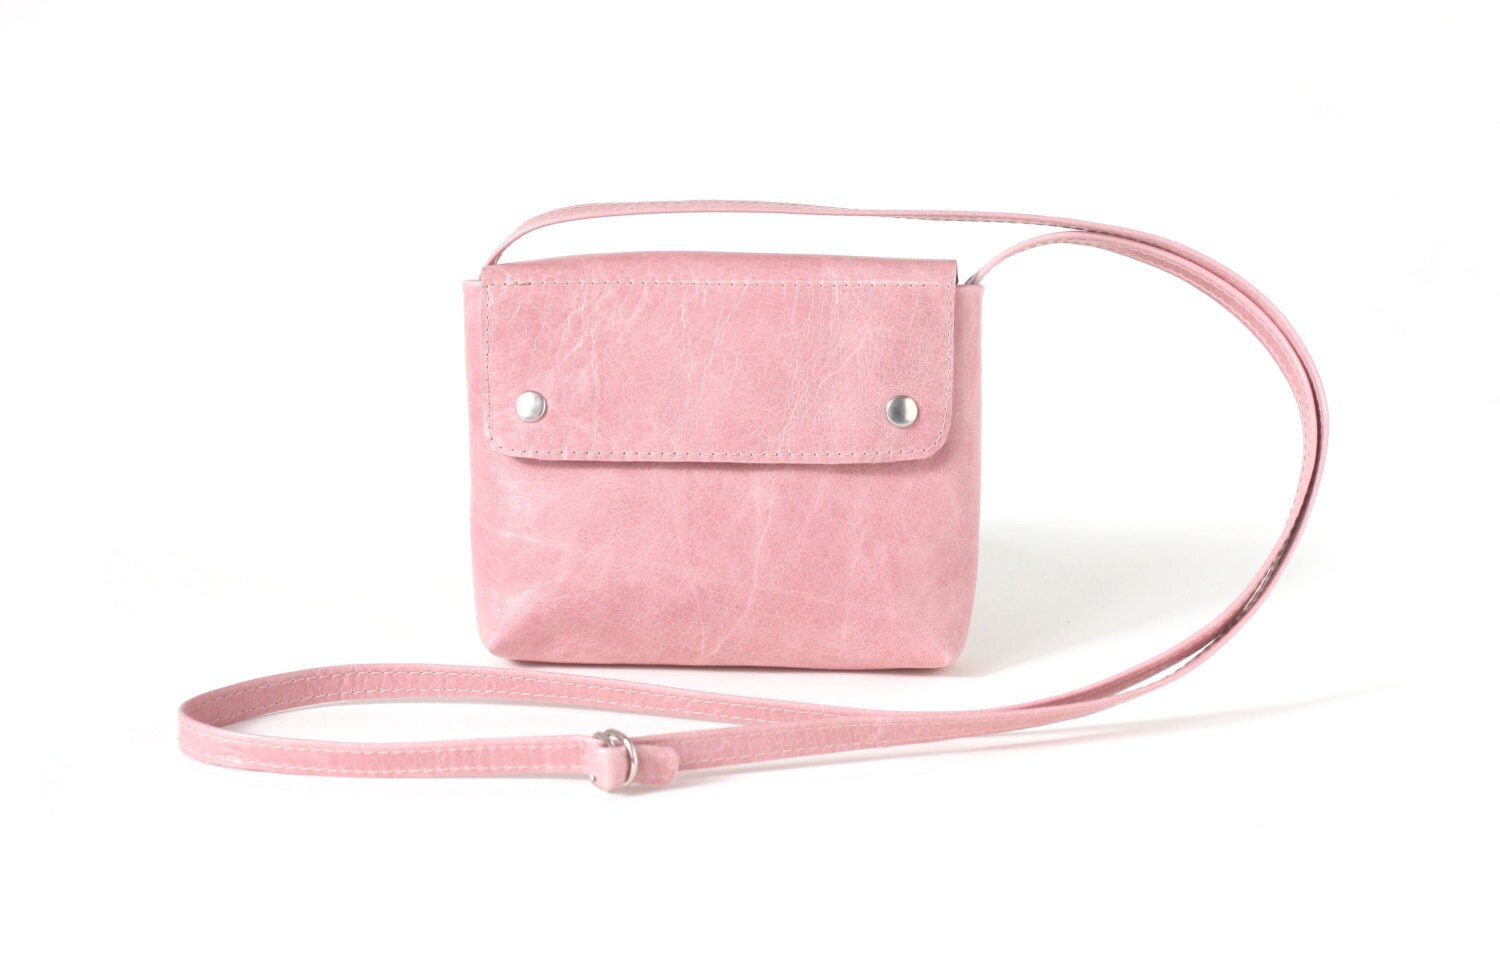 Small Crossbody Purse Strawberry Ice pink leather bag small